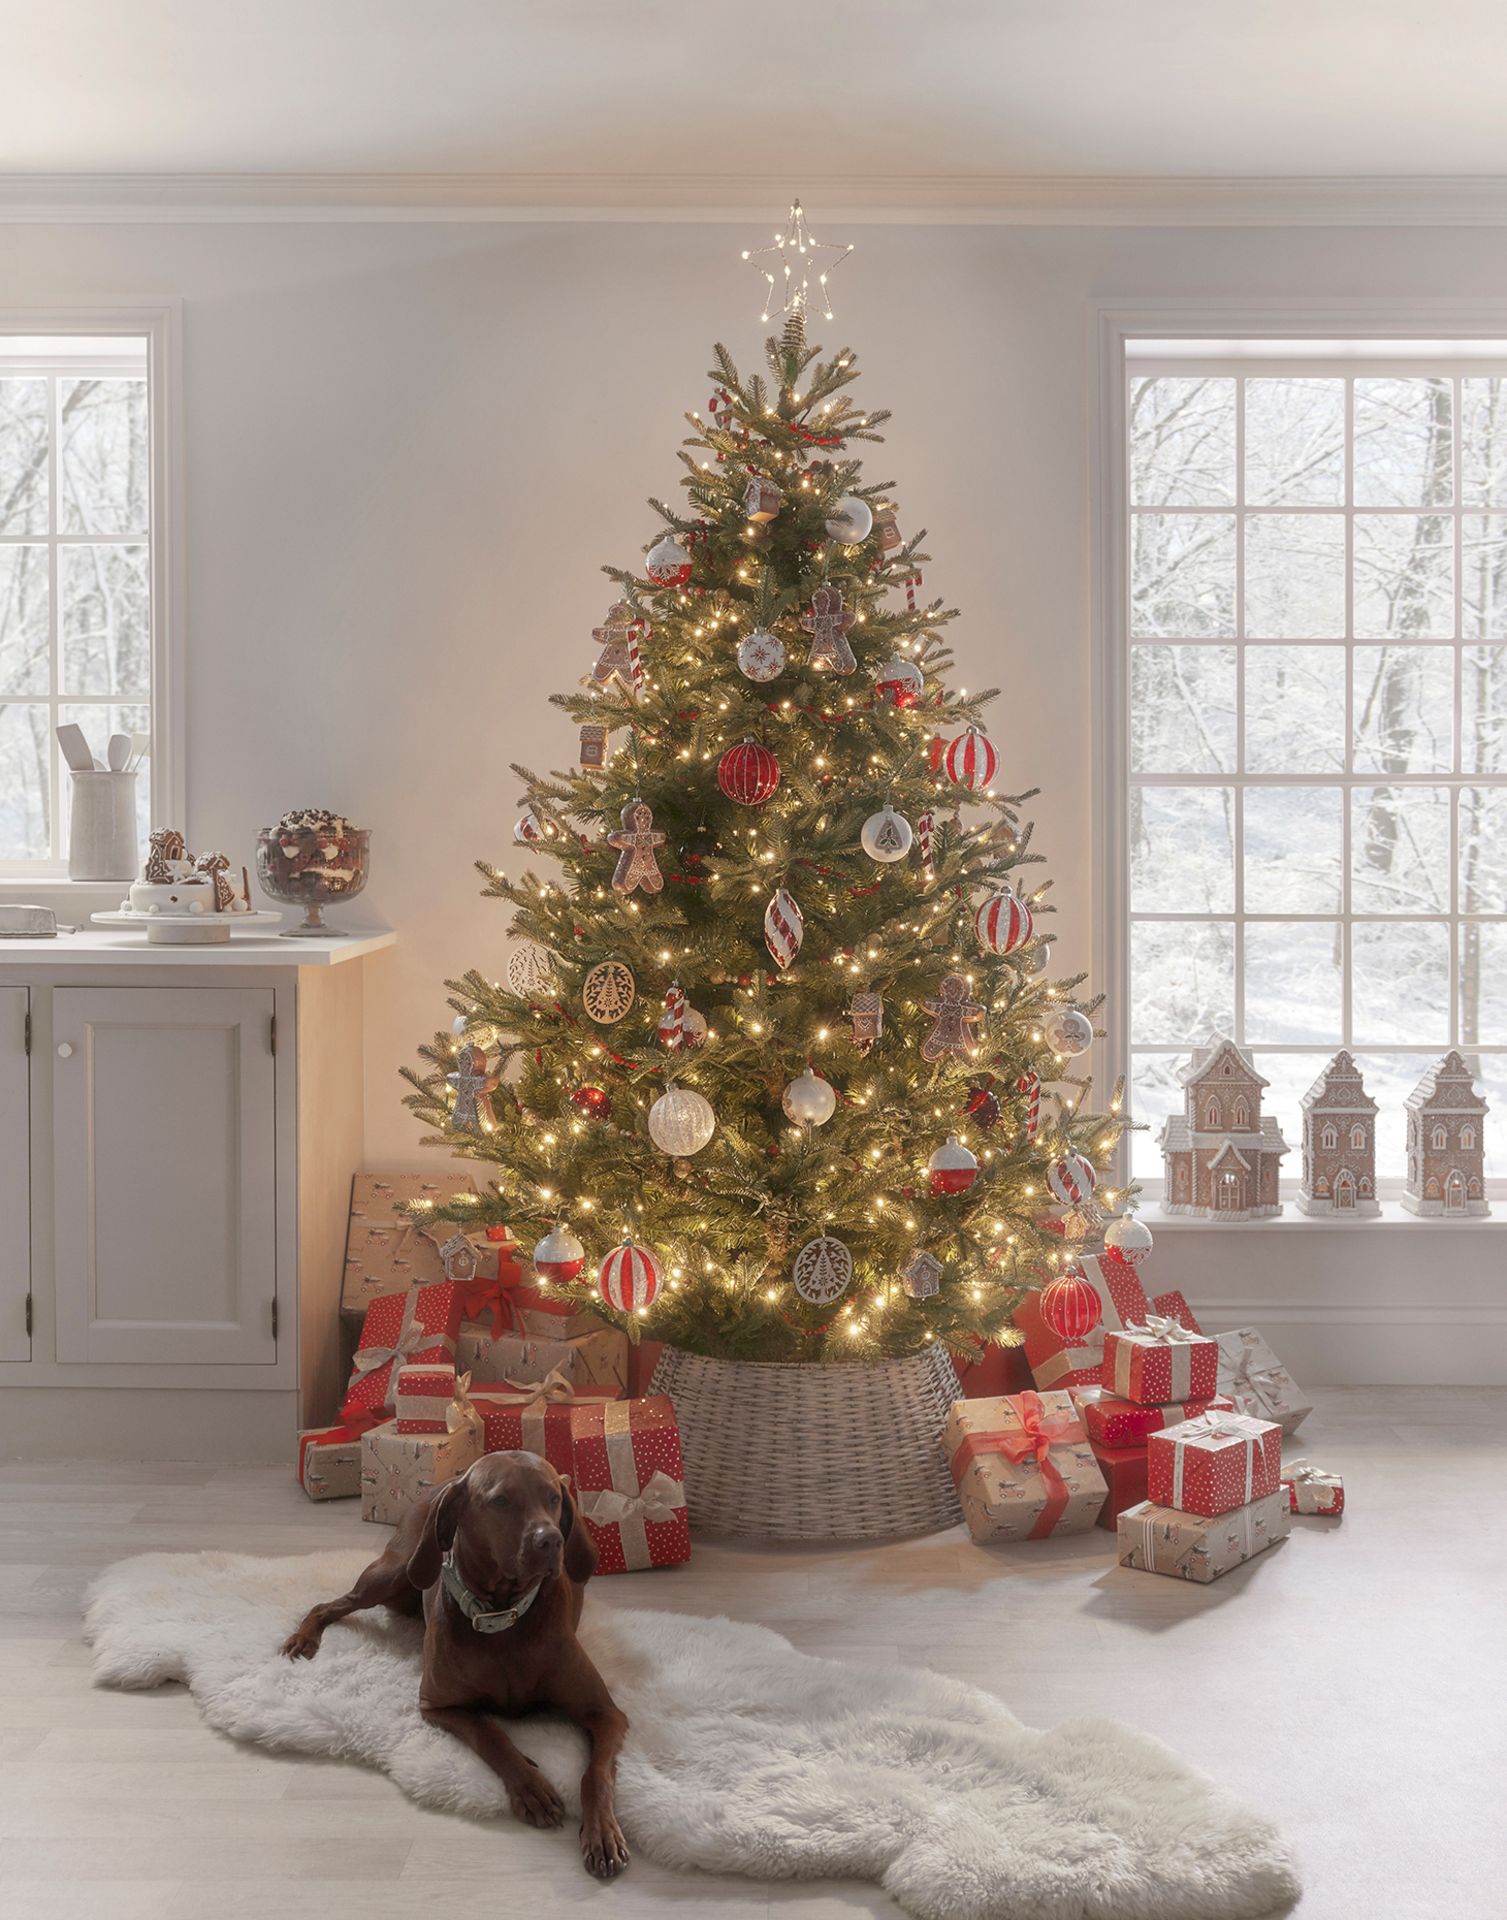 7ft Pre-Lit Aspen Mountain Spruce Christmas Tree. RRP £475.00. The perfect centrepiece for your